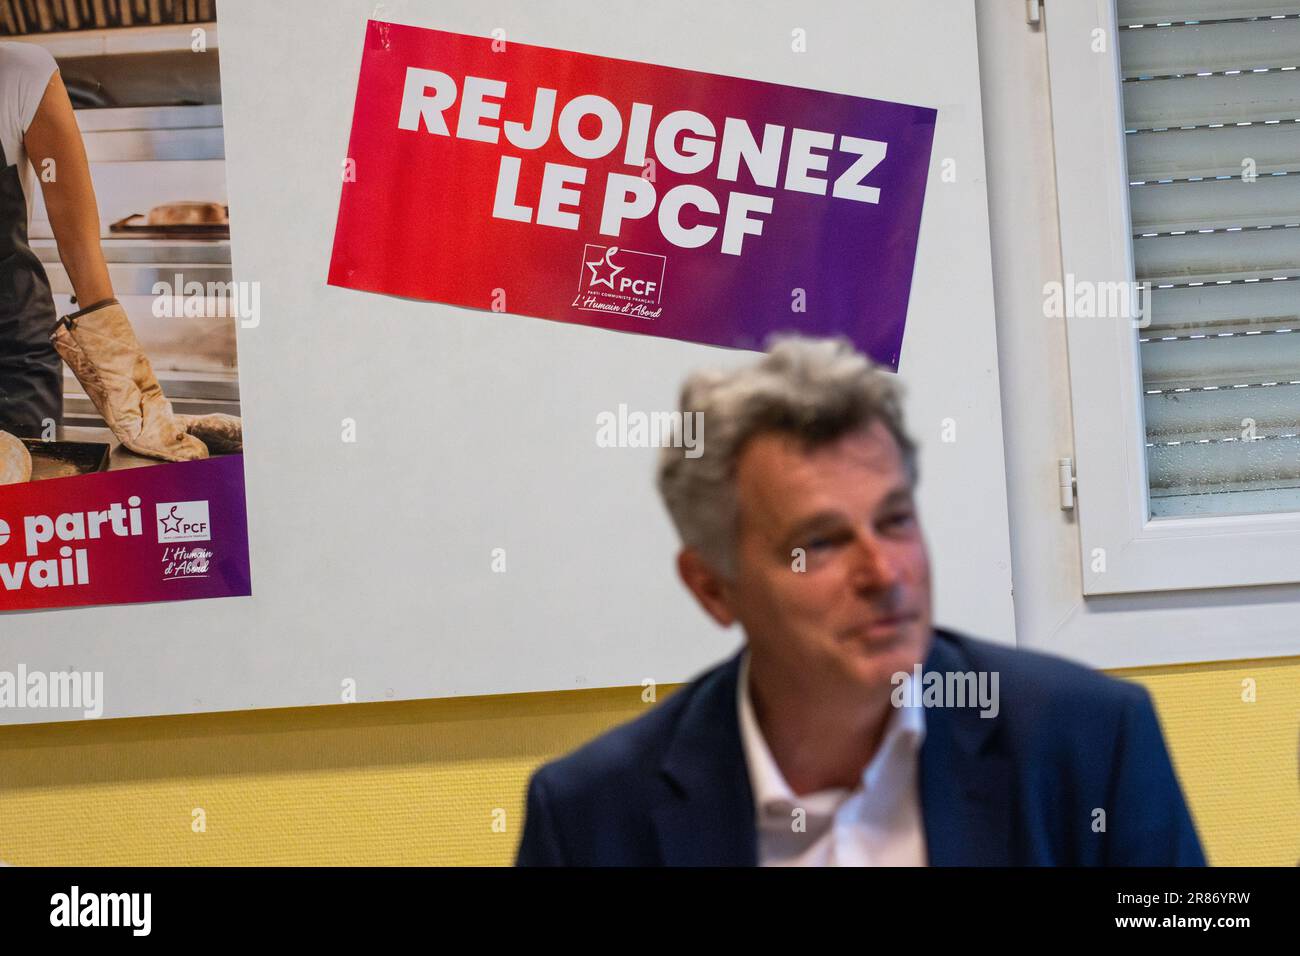 Sainte Tulle, France. 14th June, 2023. Fabien Roussel meets local elected representatives. Fabien Roussel, First Secretary of the French Communist Party, organized the final stage of his Tour de France to listen to the French people in Sainte-Tulle, France. Credit: SOPA Images Limited/Alamy Live News Stock Photo